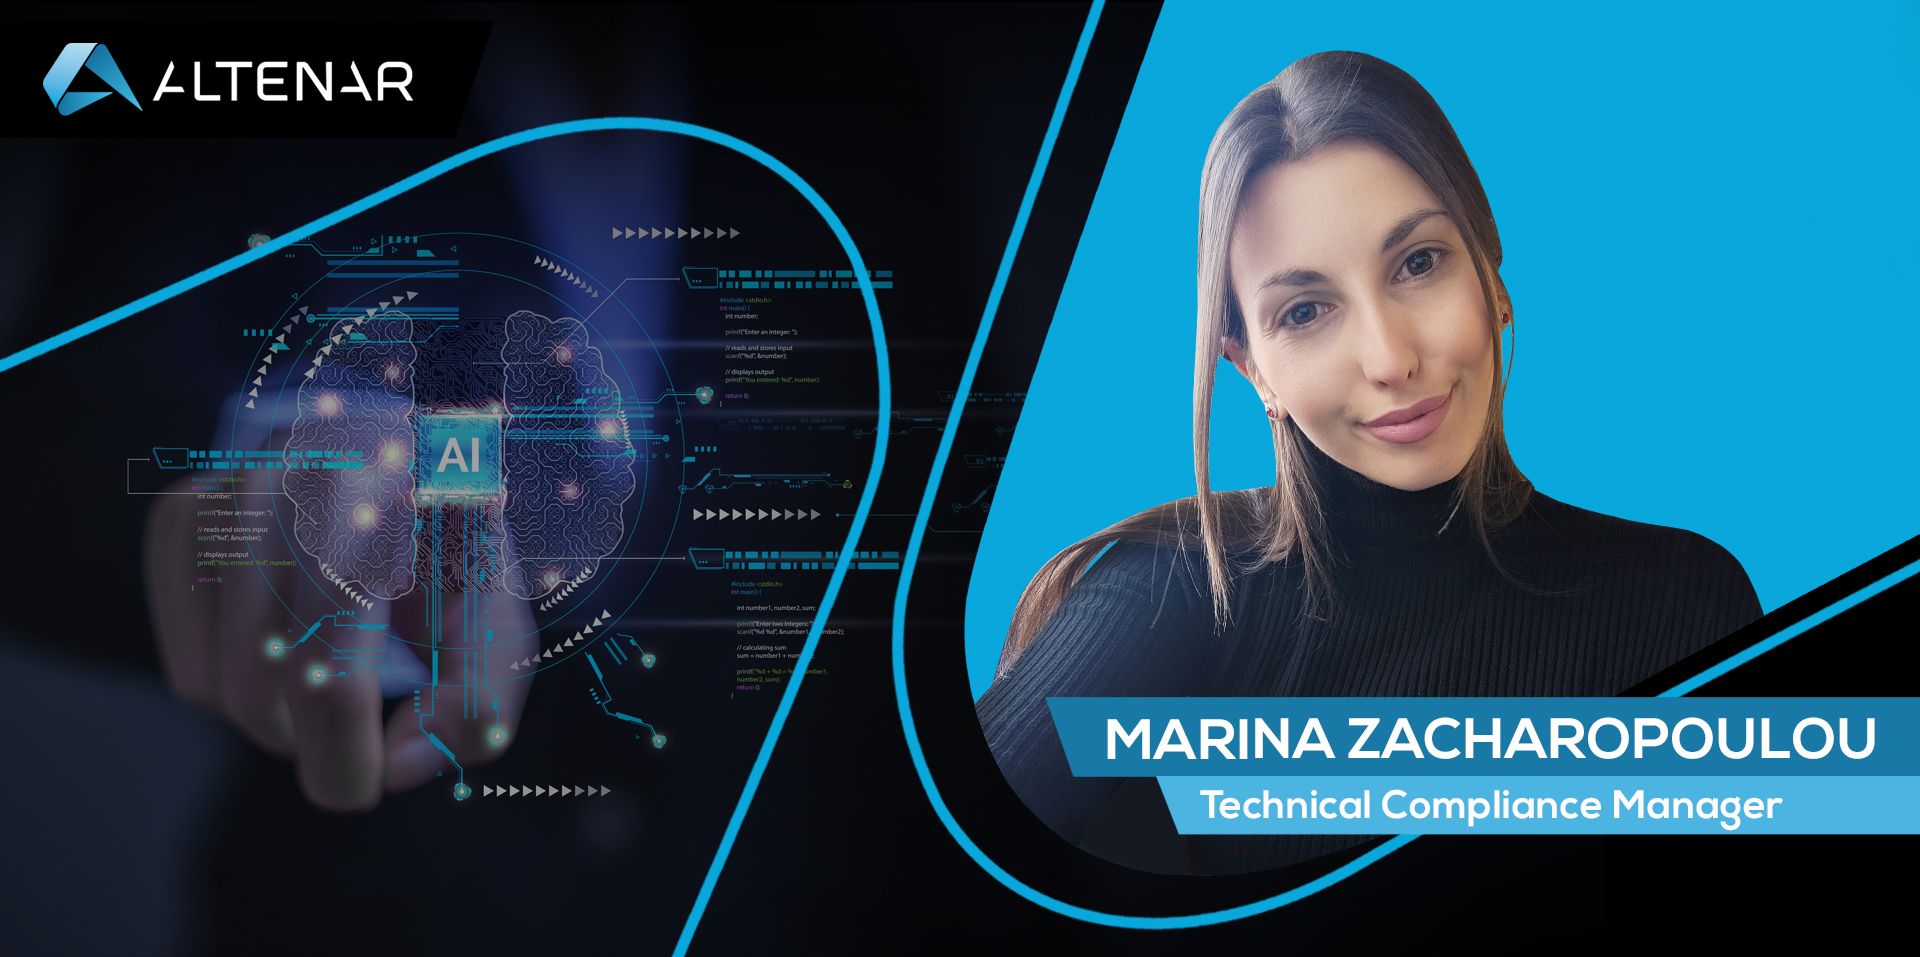 Opinions on Artificial Intelligence With Comments From Altenar’s Marina Zacharopoulou 